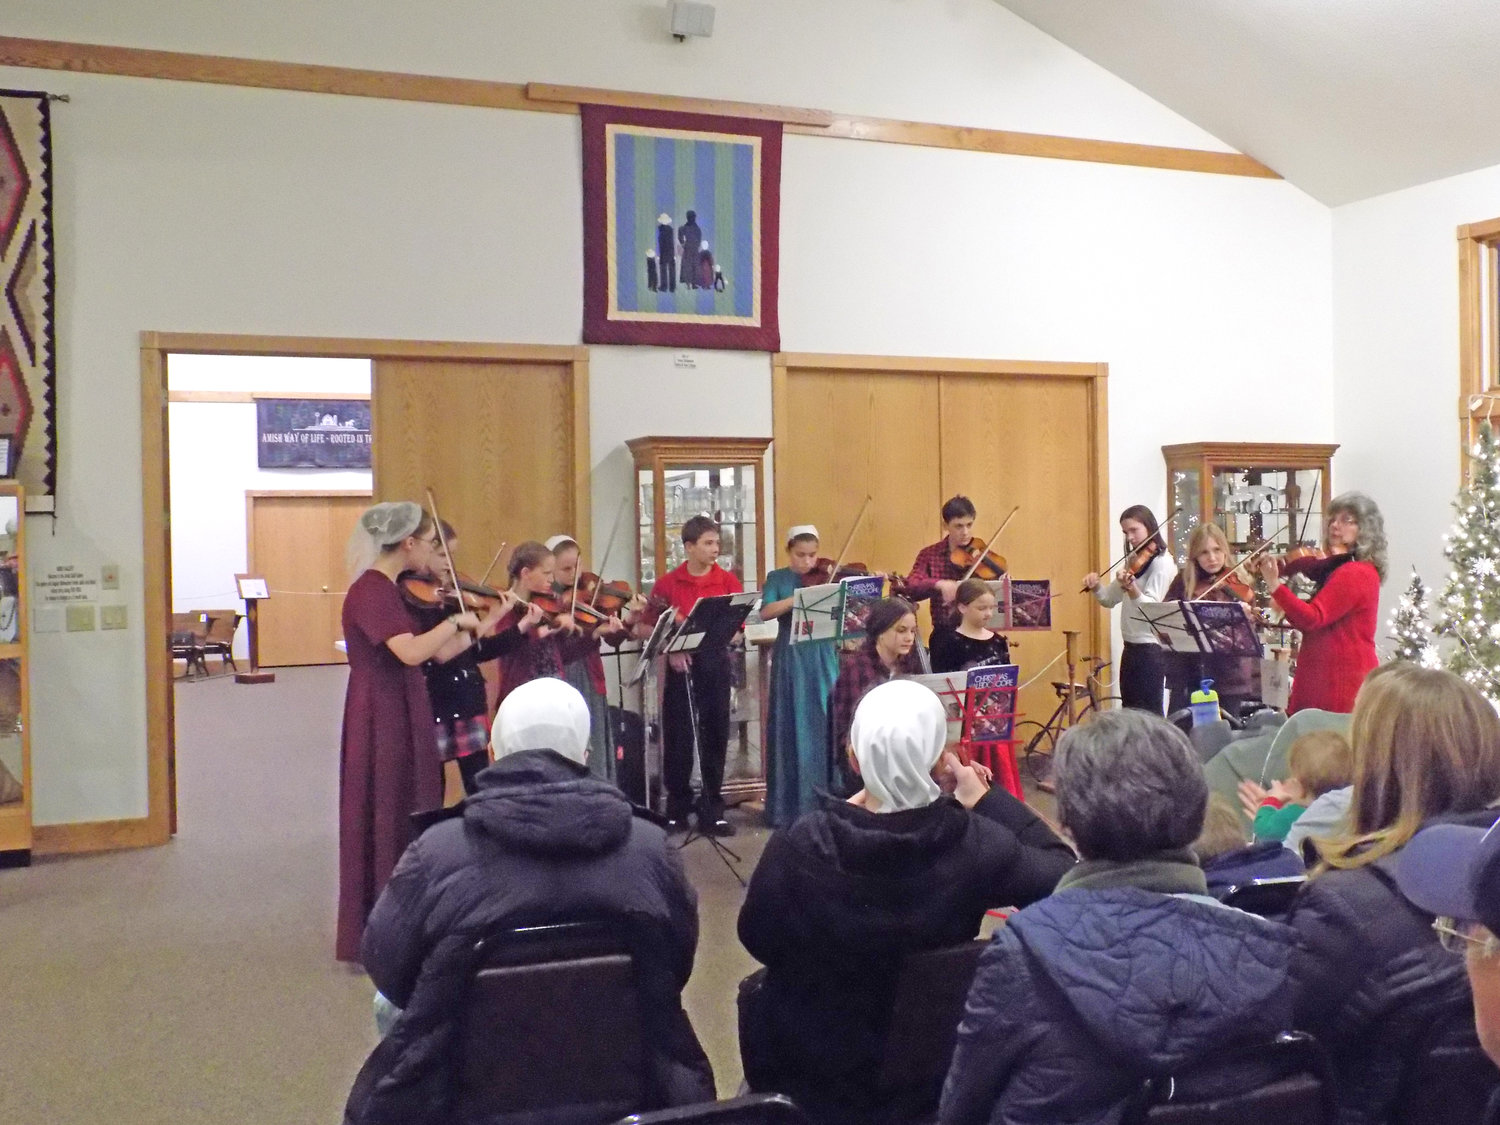 Musical performances filled the evening at Kalona Historical Village’s Welcome center on Saturday night.